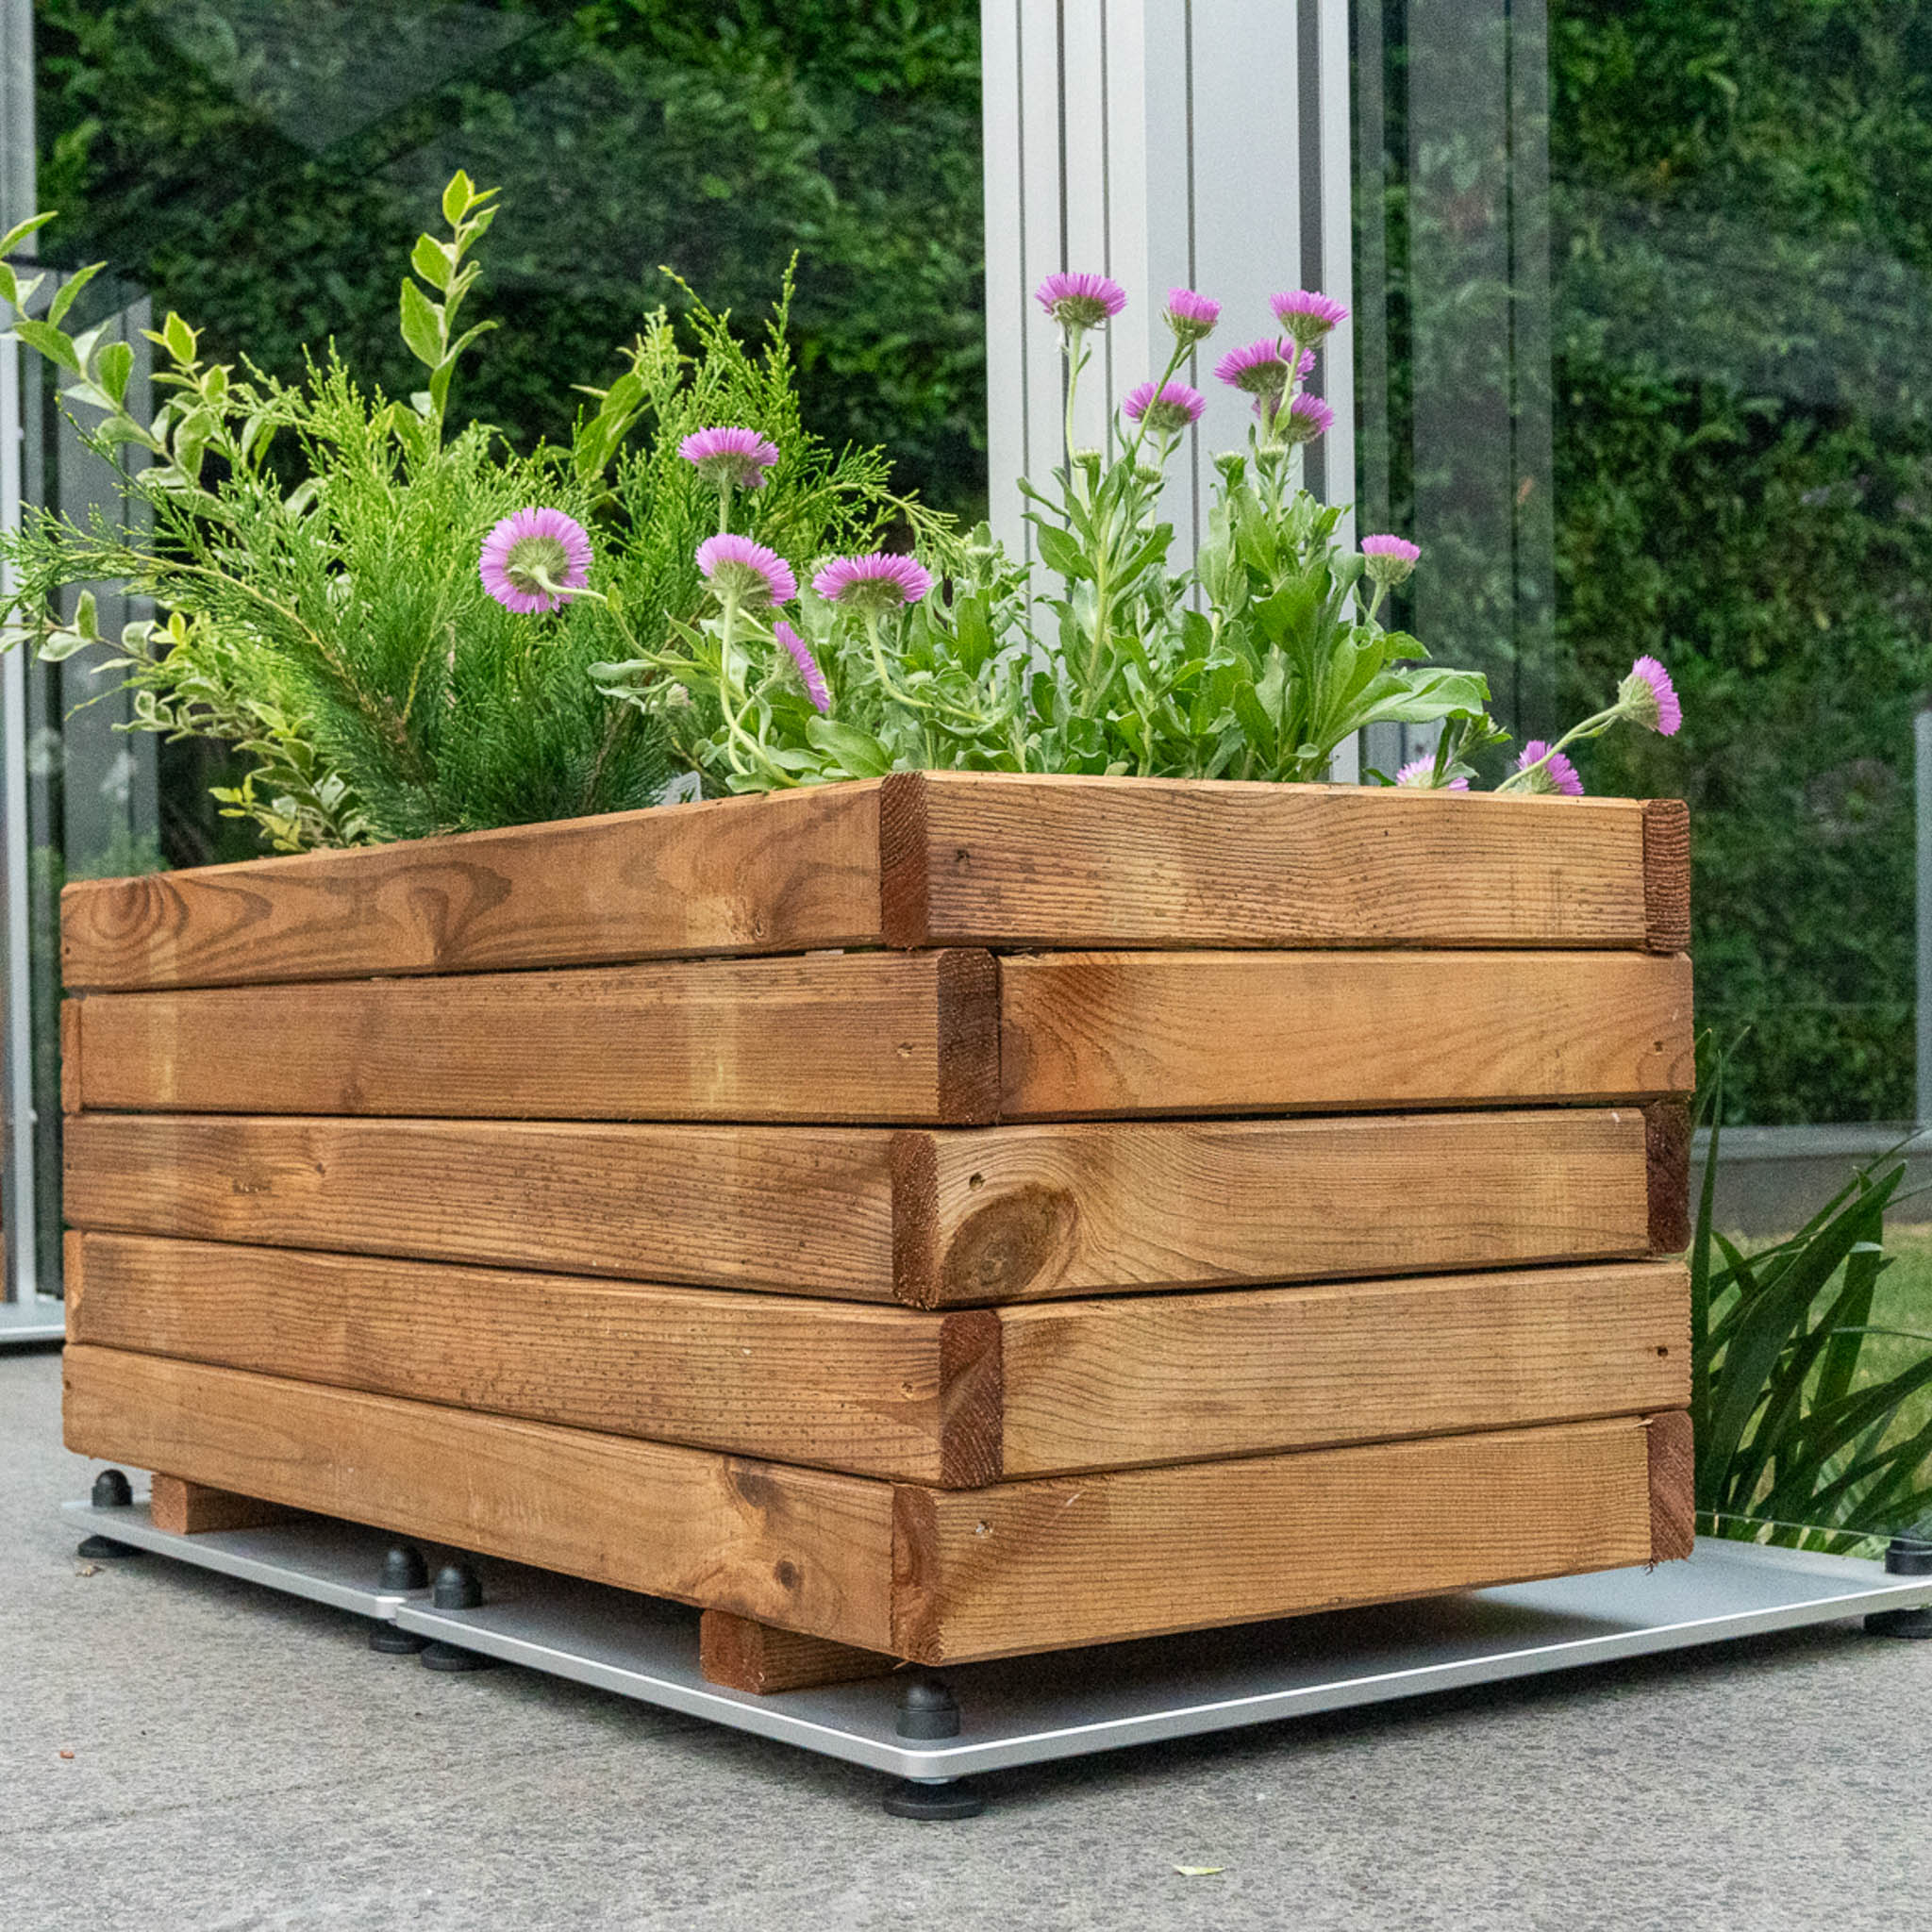 A wooden square planter sat on a footed base plate 